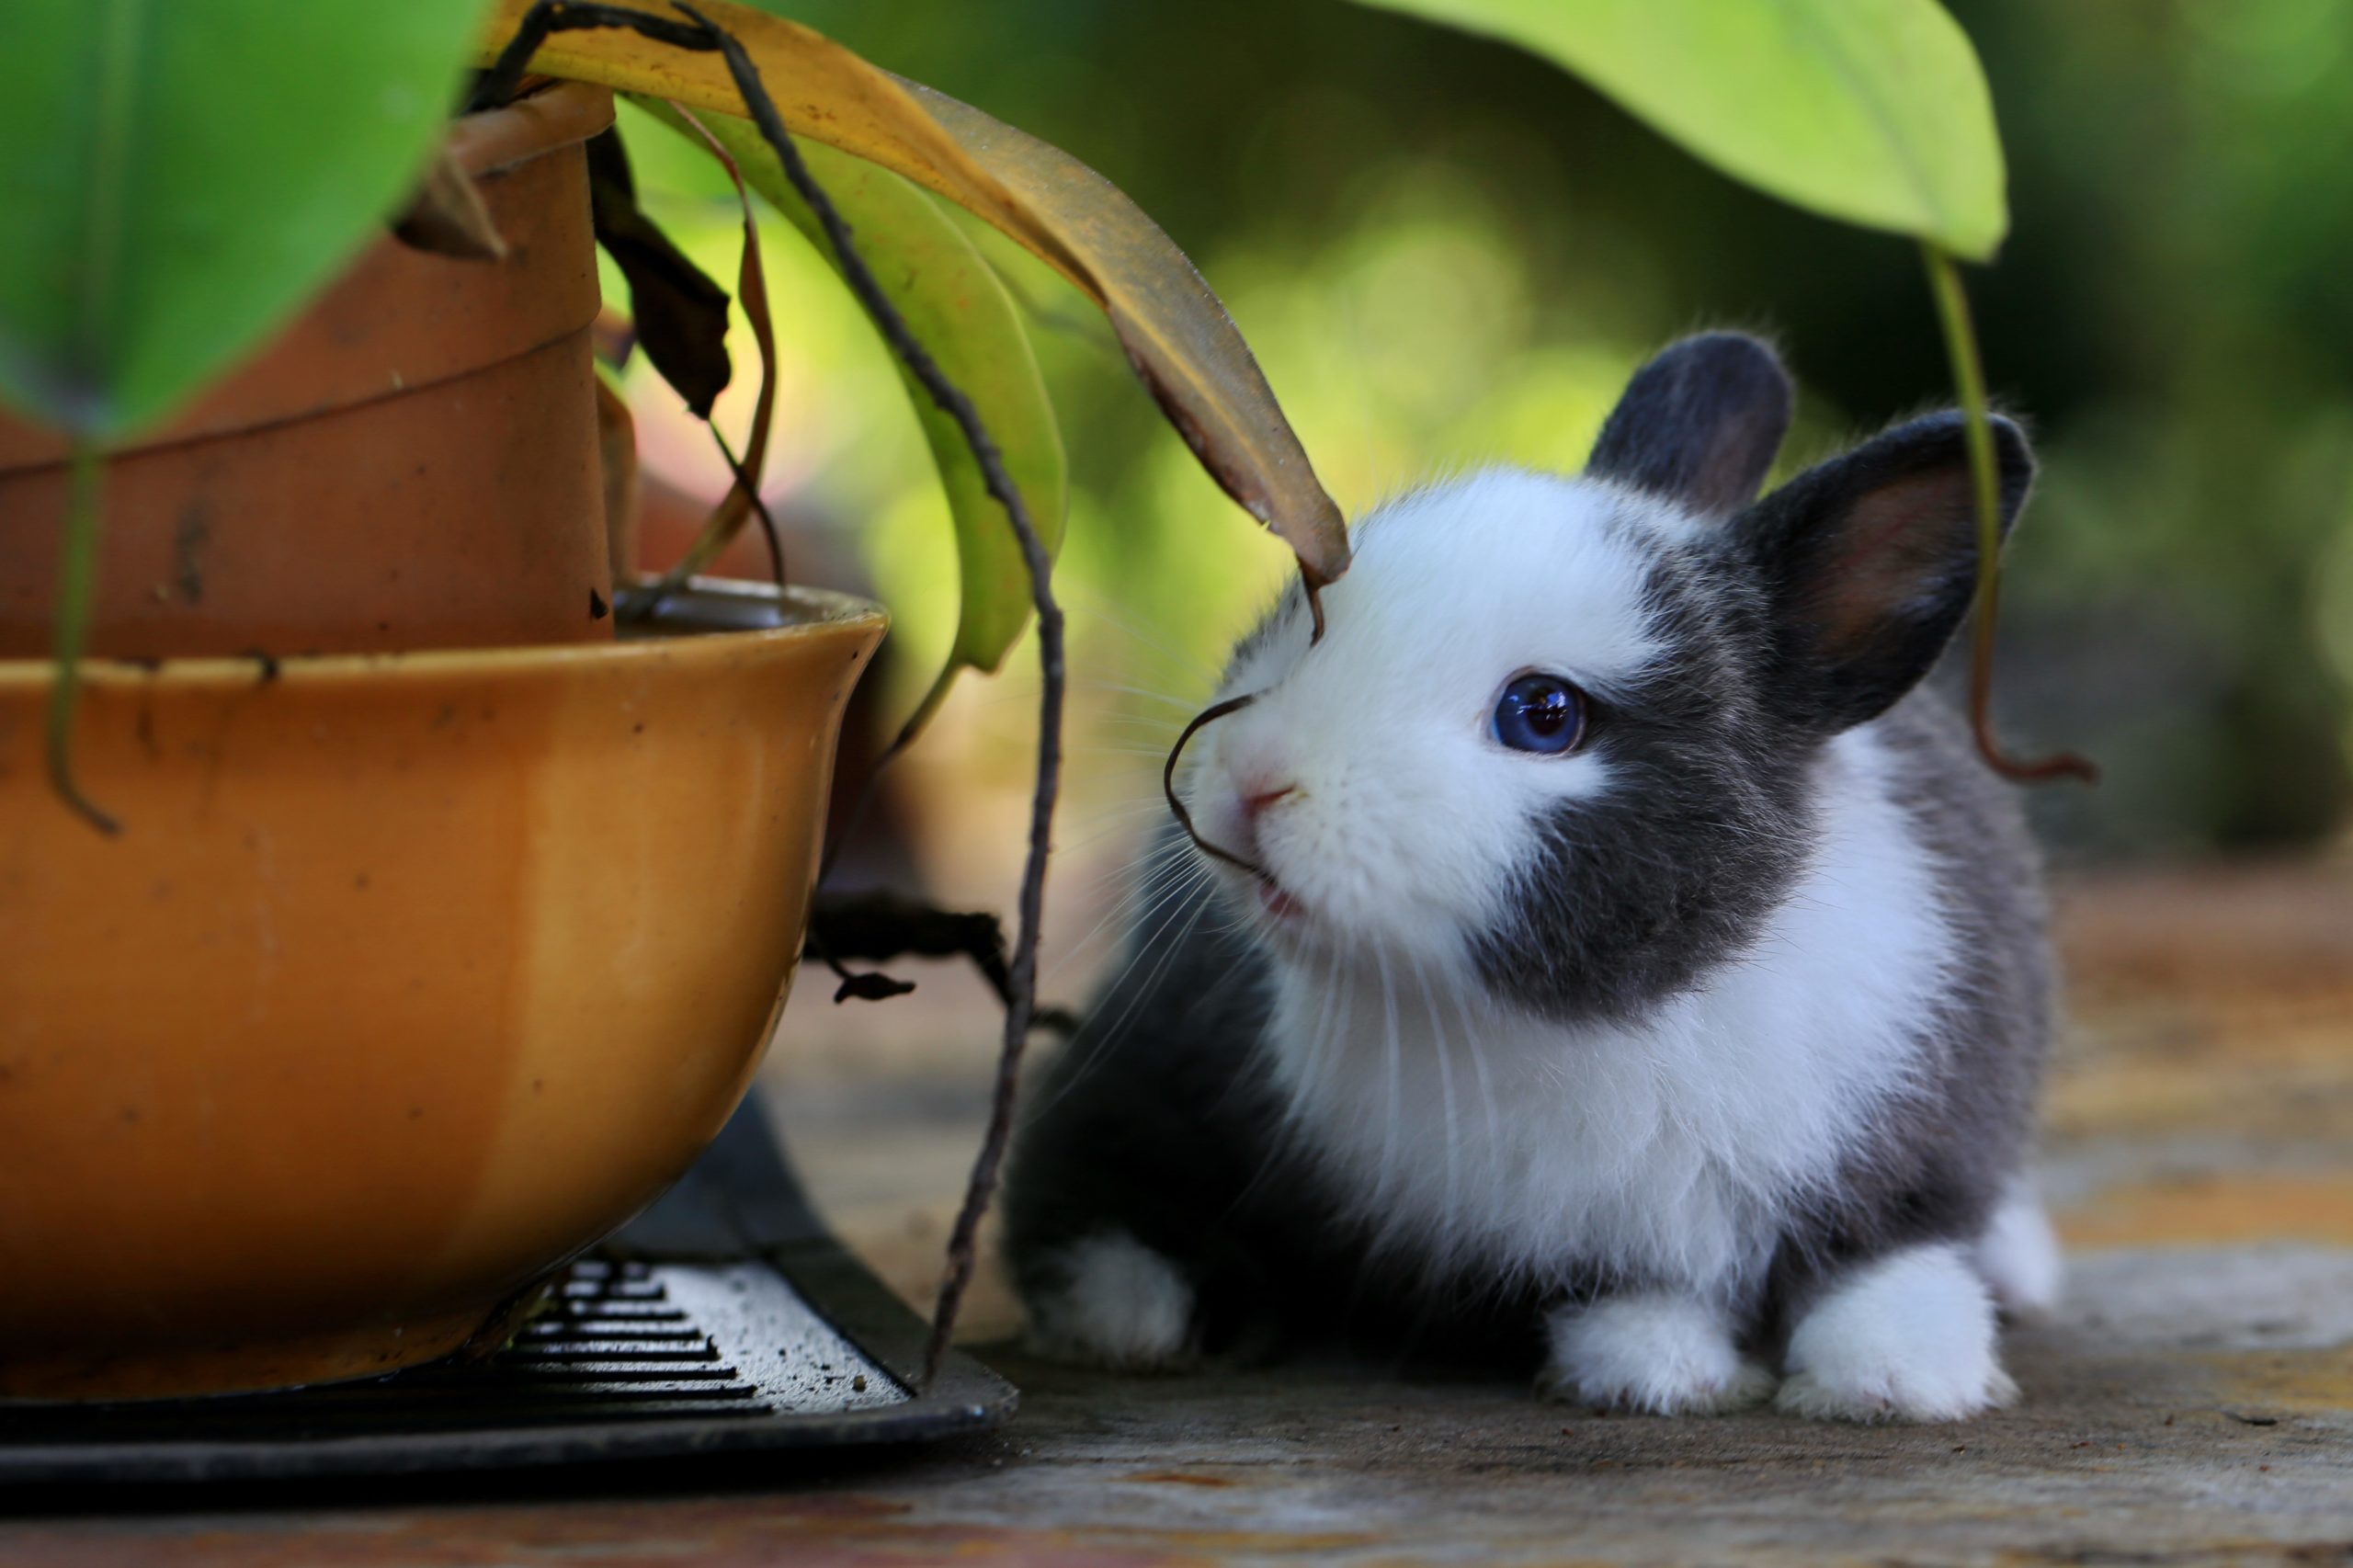 How to care for your pet rabbit